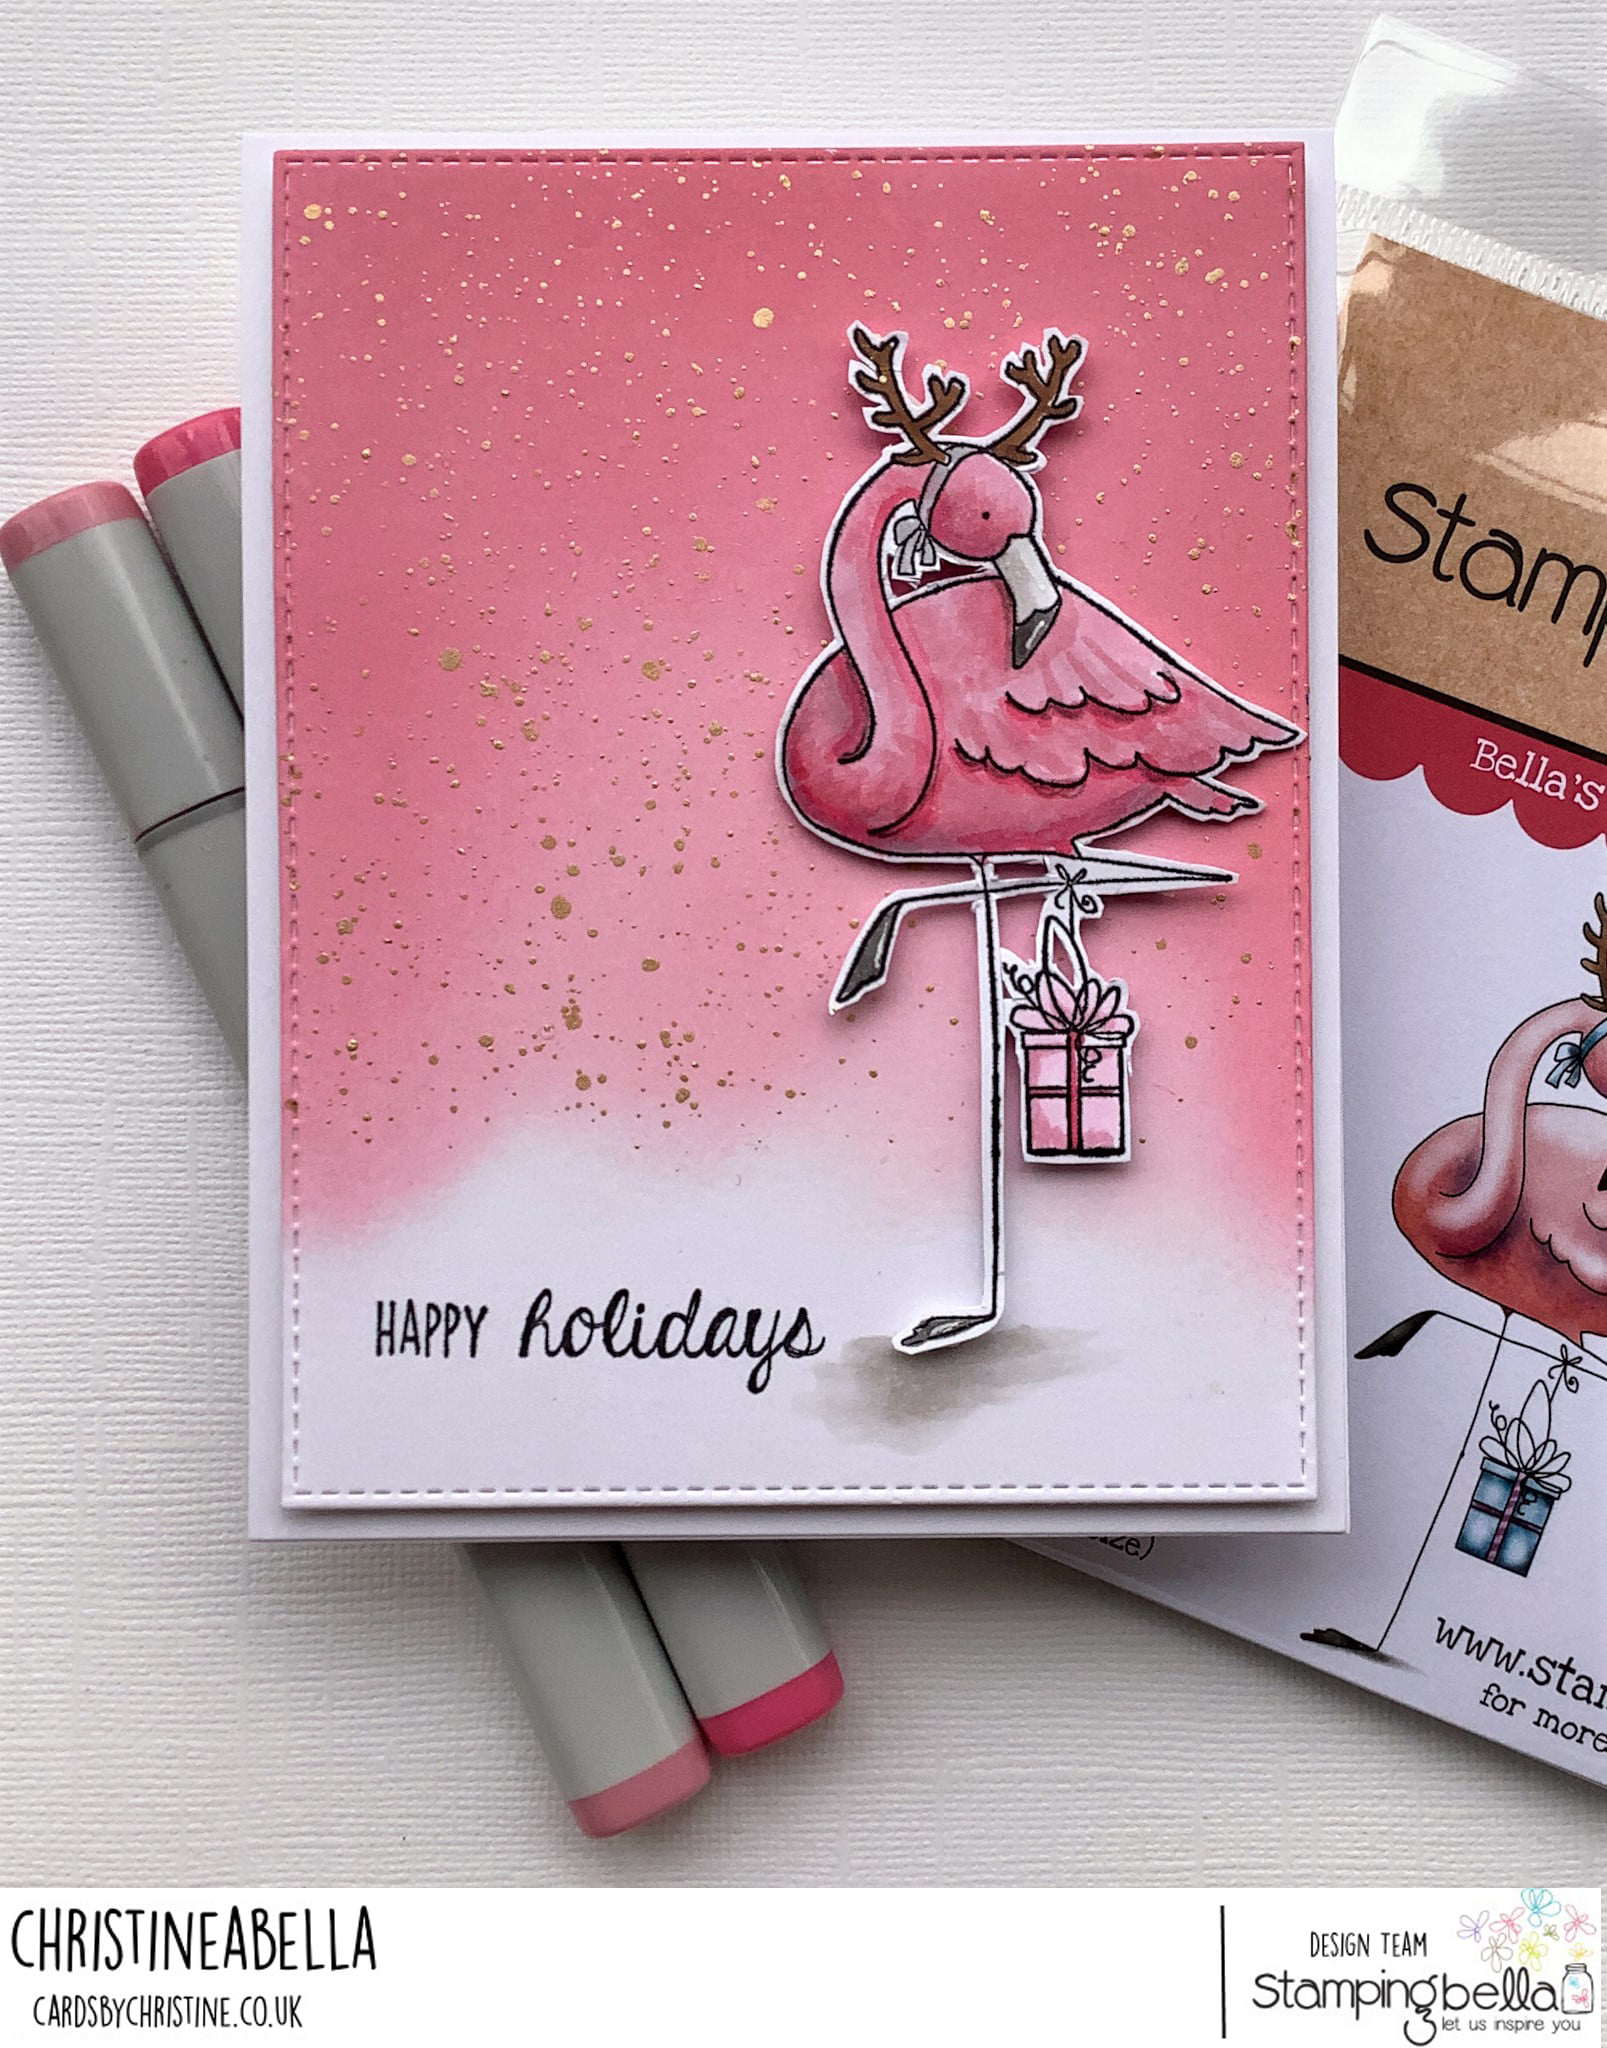 www.stampingbella.com: rubber stamp used: FLAMINGODEER card by Christine Levison